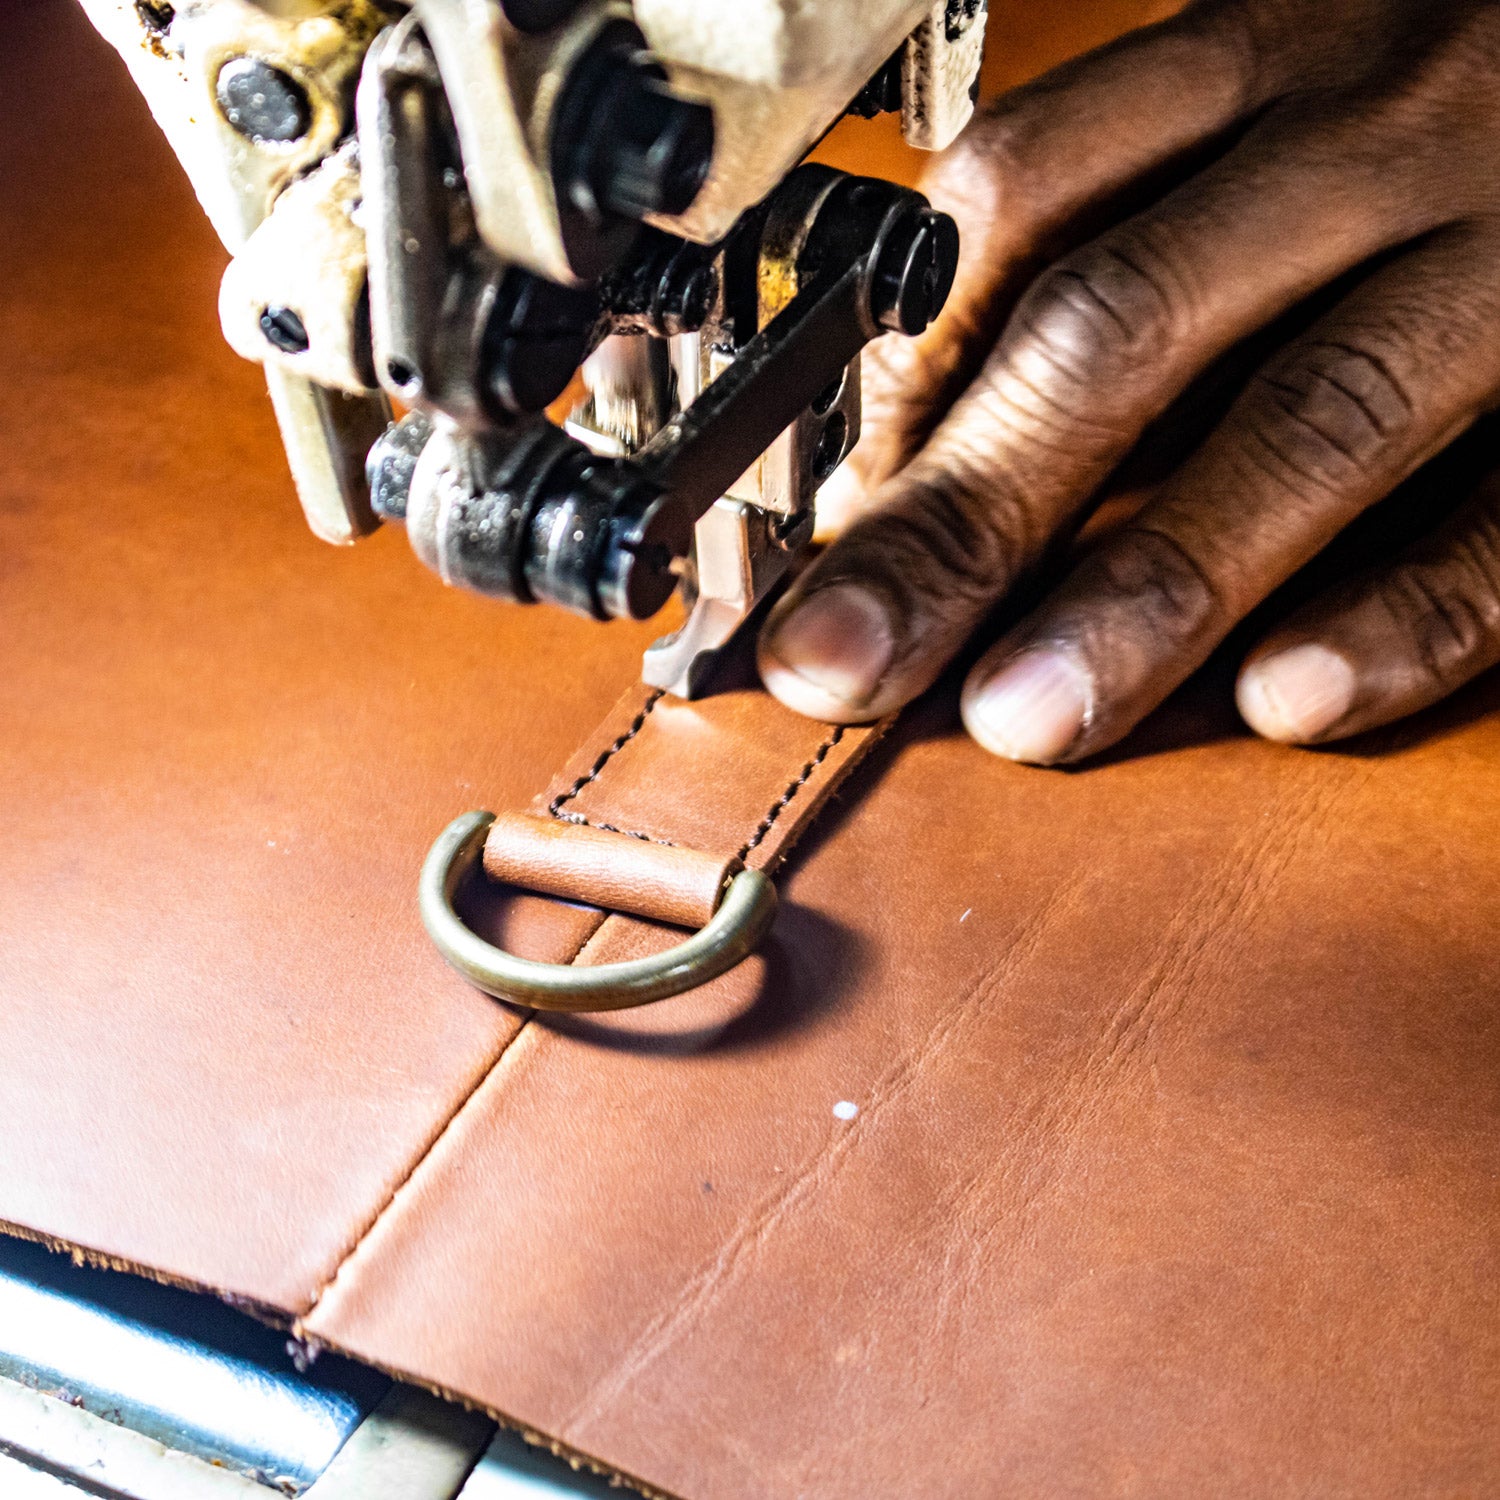 Types of Leather Repairs and Alterations – MAHI Leather